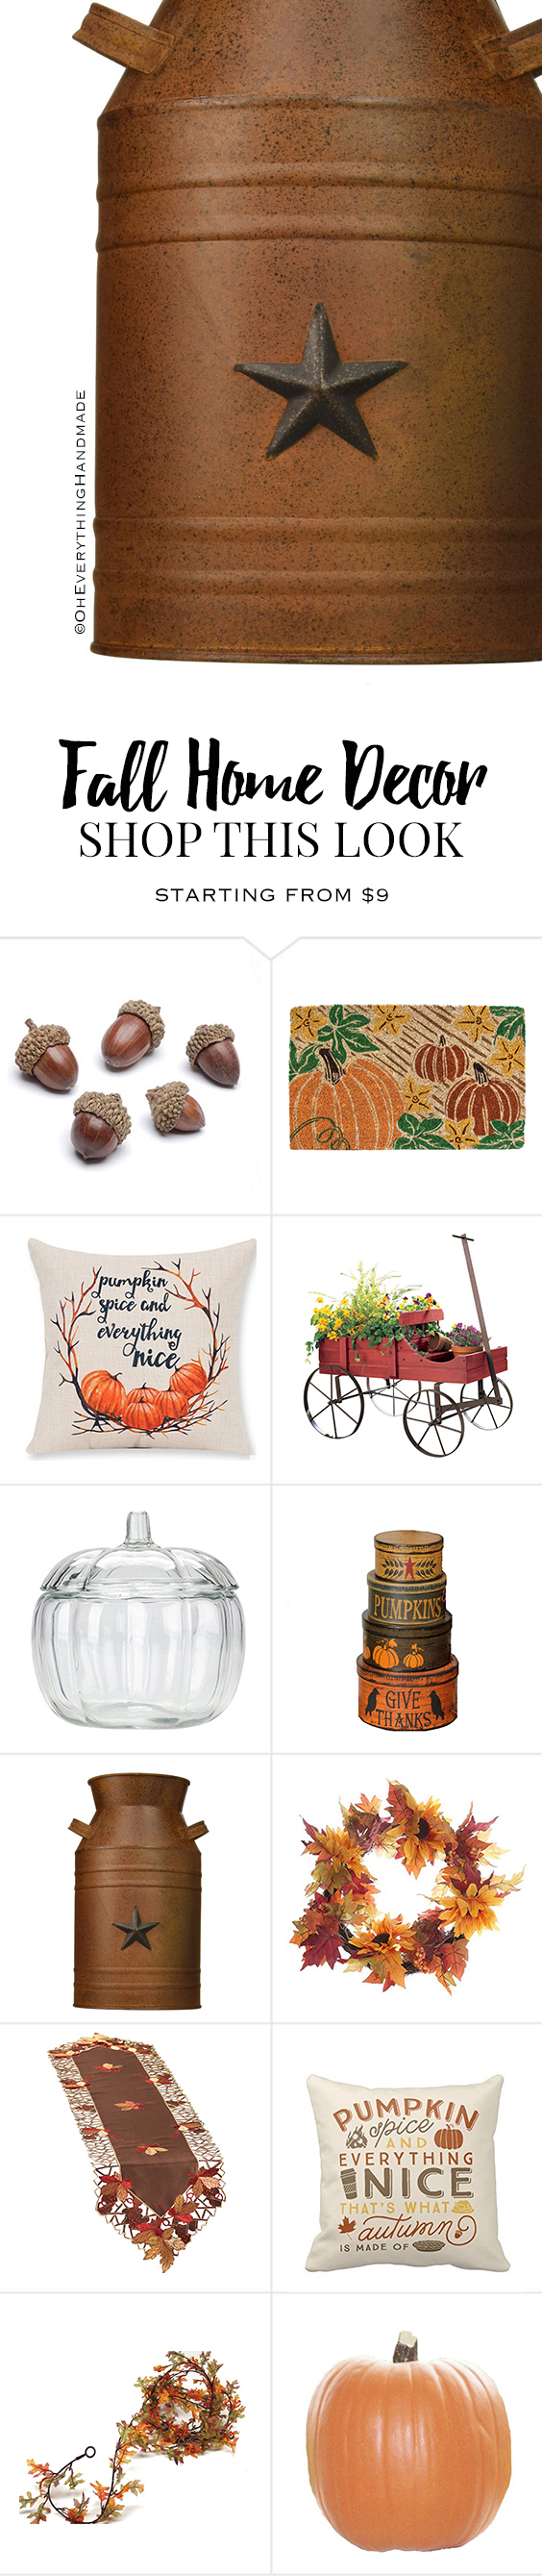 shop-the-look-fall-home-decor-featured-copy